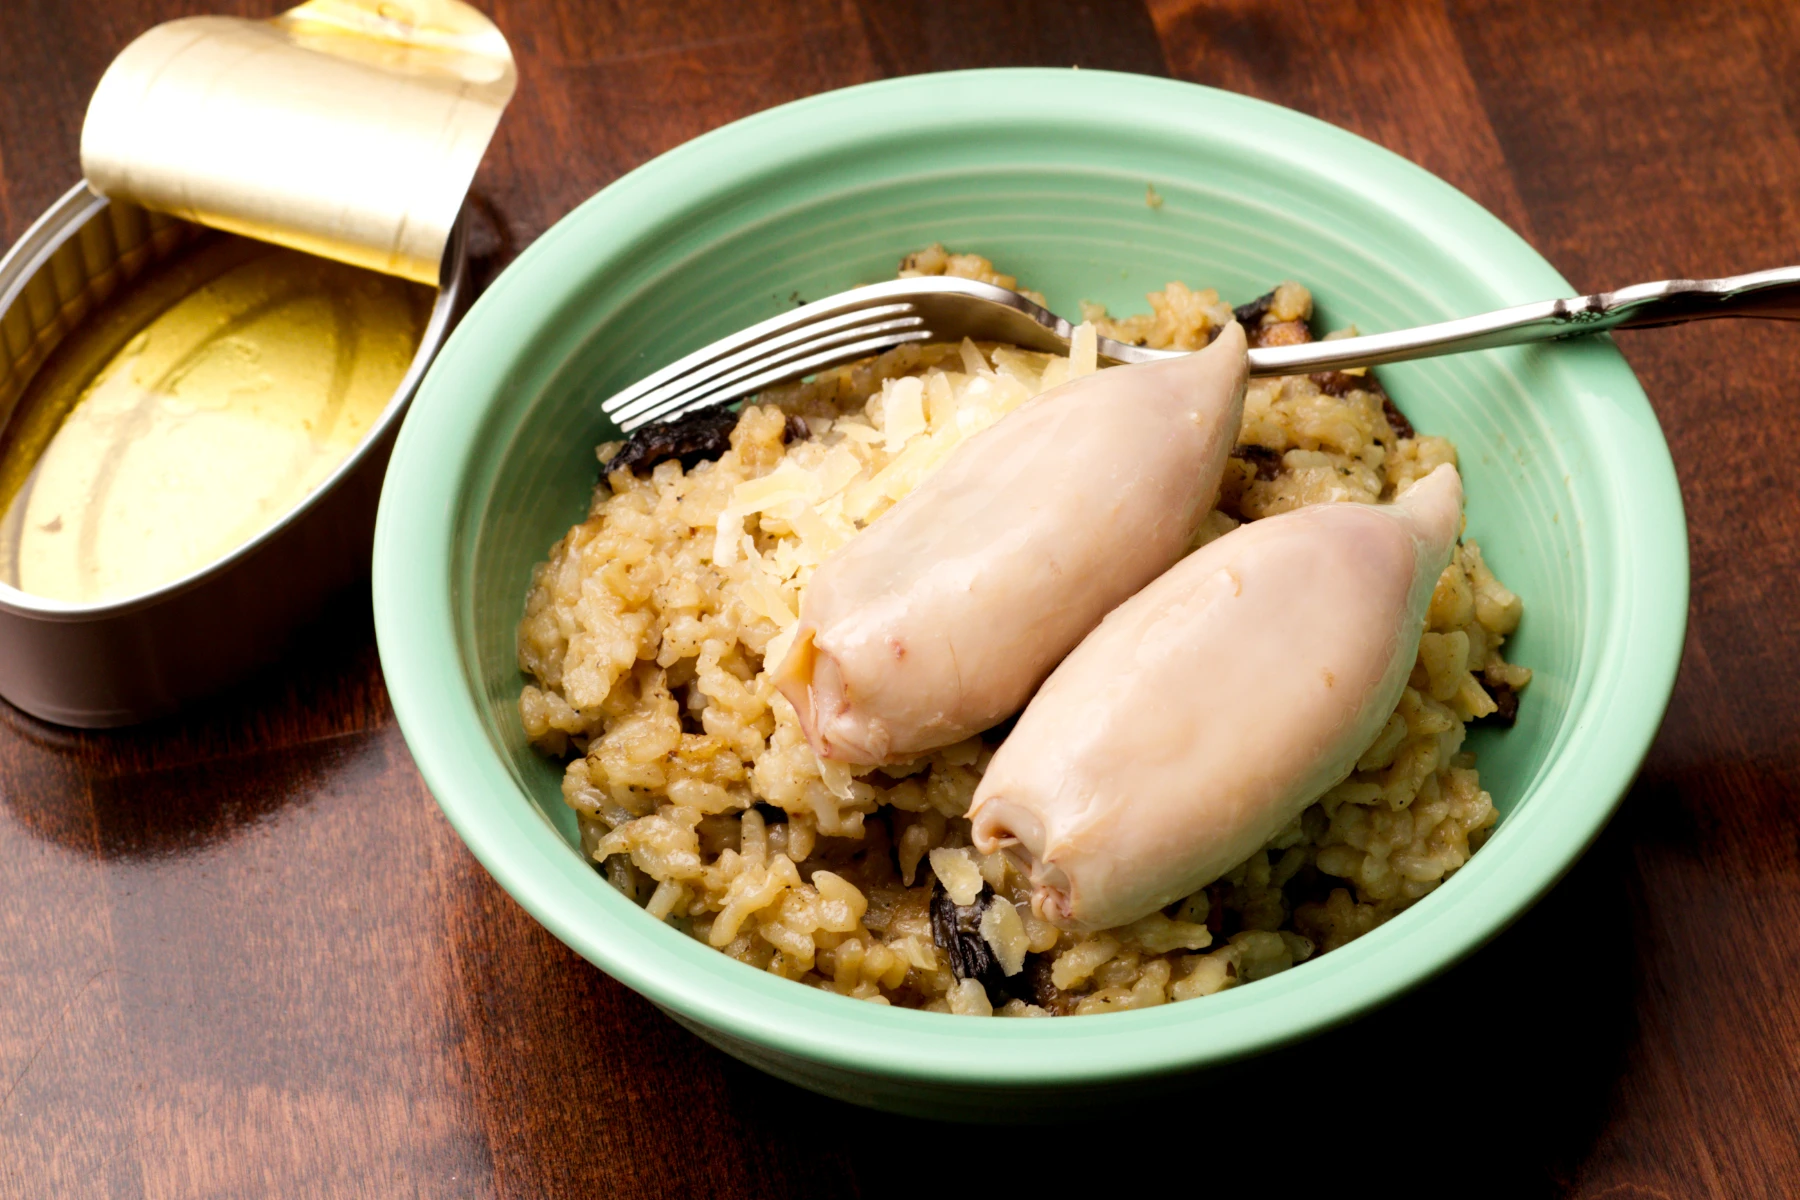 Stuffed squid on risotto